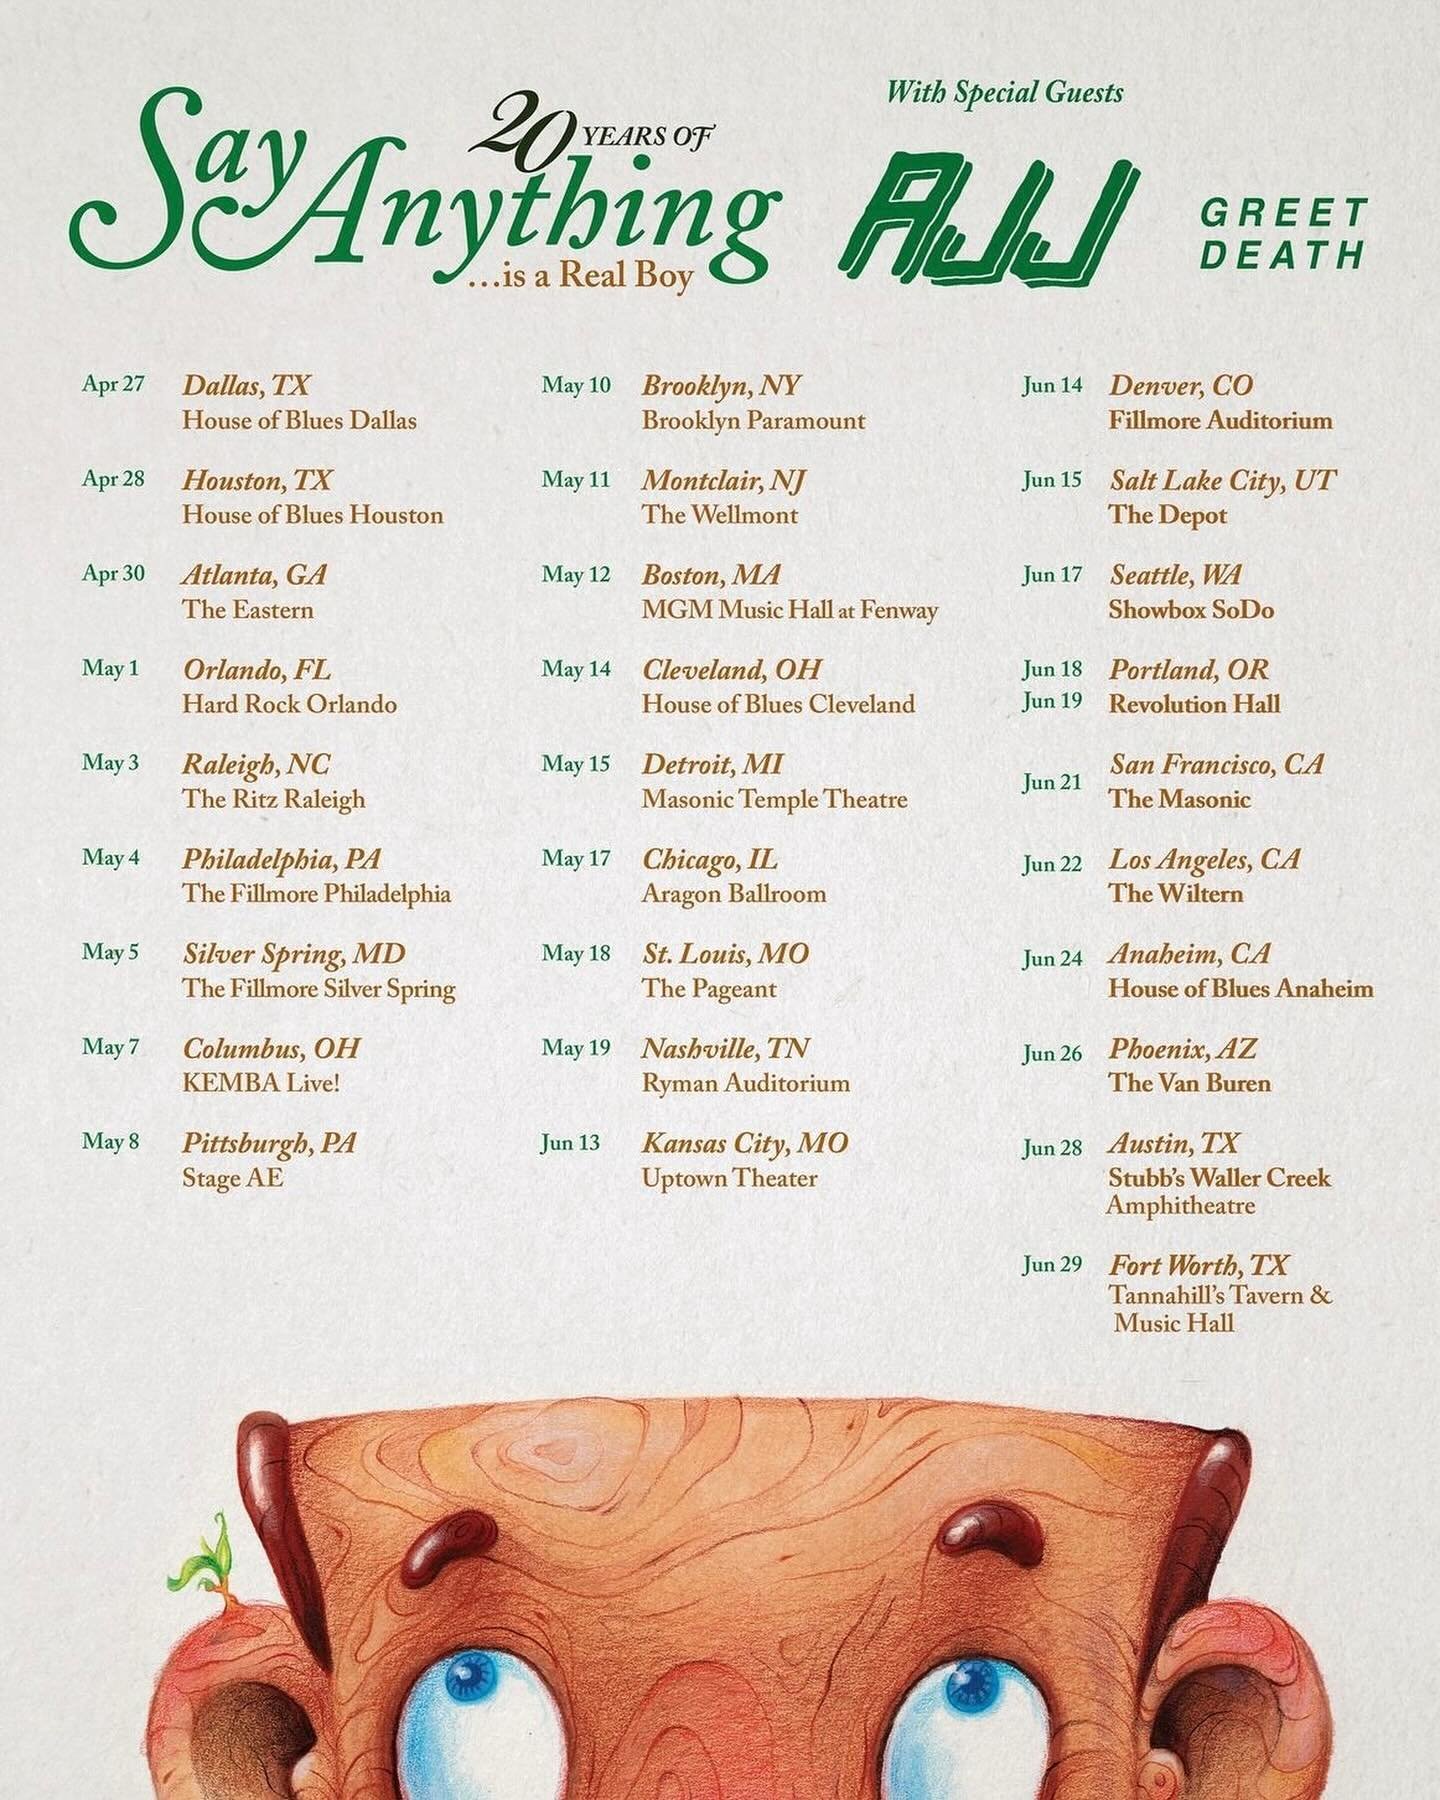 New song, epic tour.

This is your reminder that AJJ is currently on the road with @sayanything and @deathbois playing hits new and old. See you there? 🫡